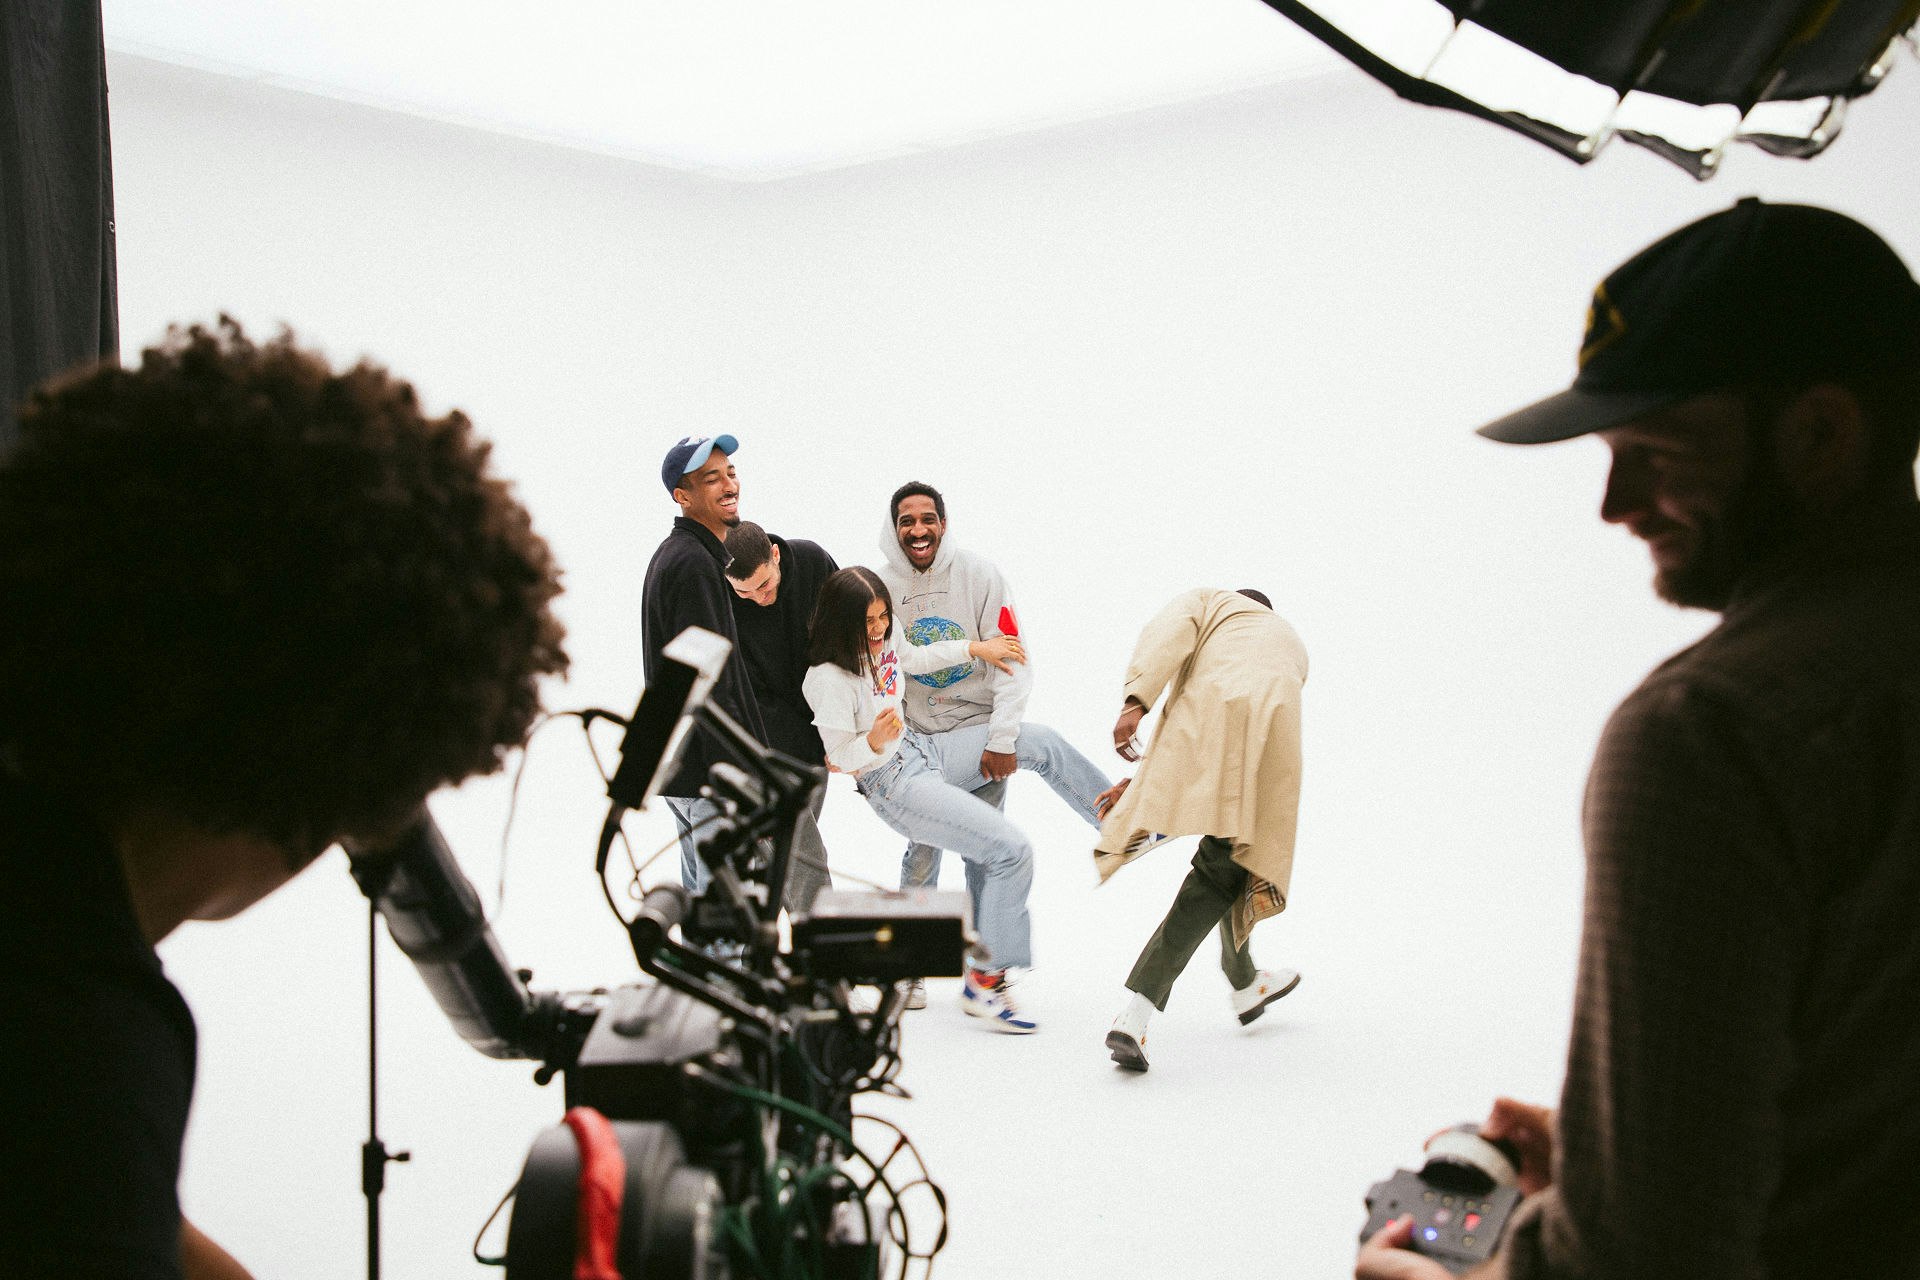 Behind the scenes of the Ama Lou 'Northside' shoot in LA - Producer Sam Hunt, Photo by Haley Blavka